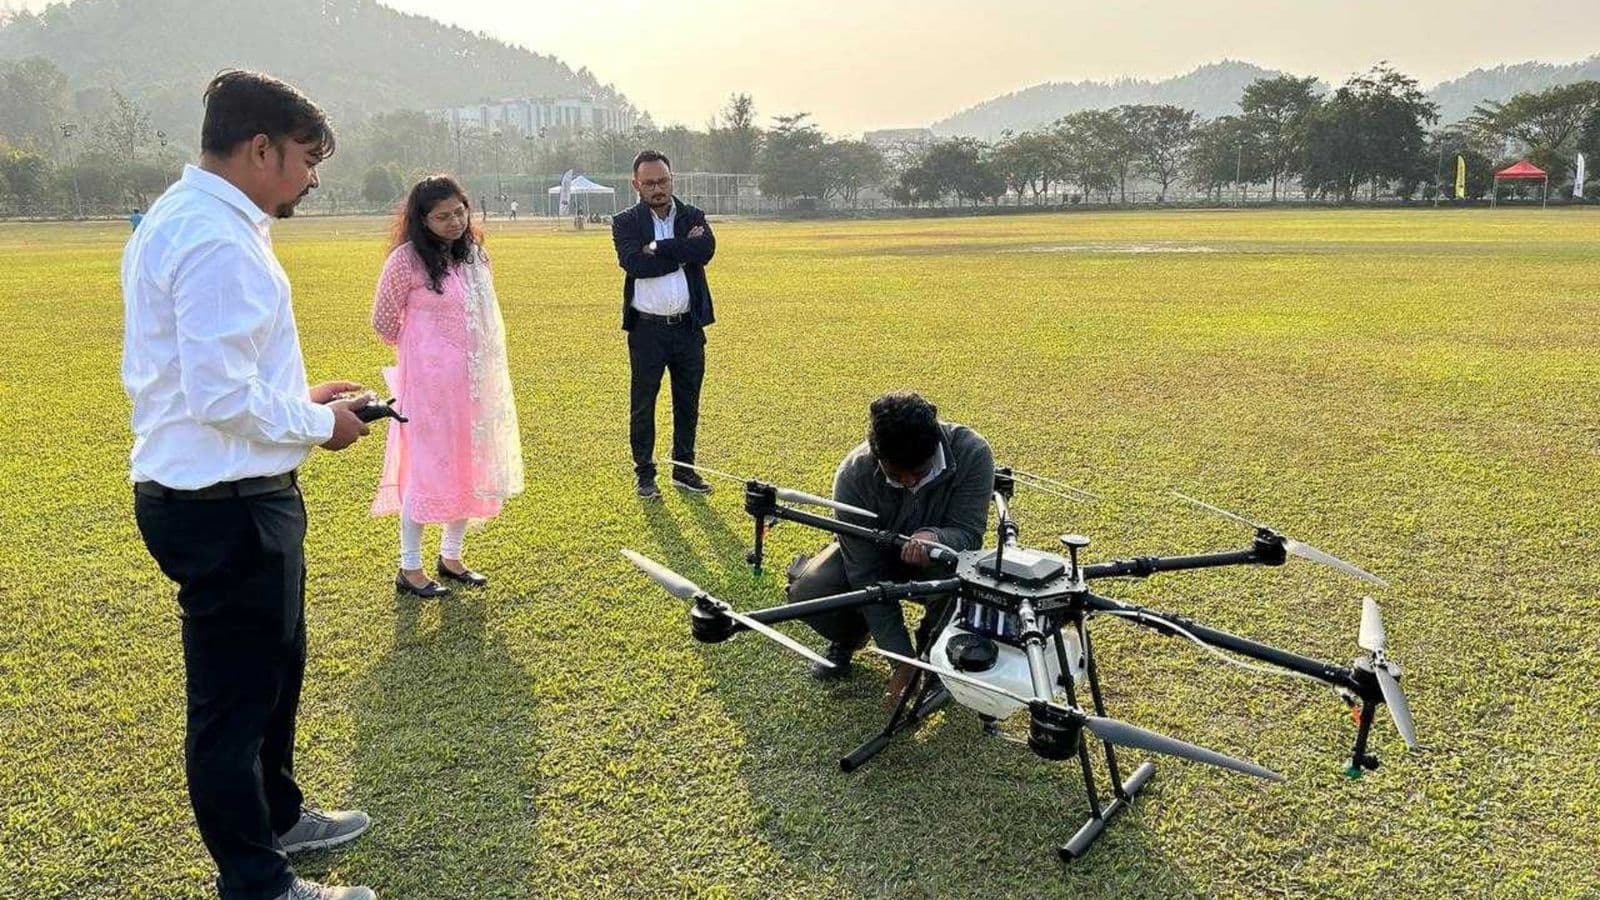 IIT Guwahati has claimed it to be the largest drone pilot training organisation in India.